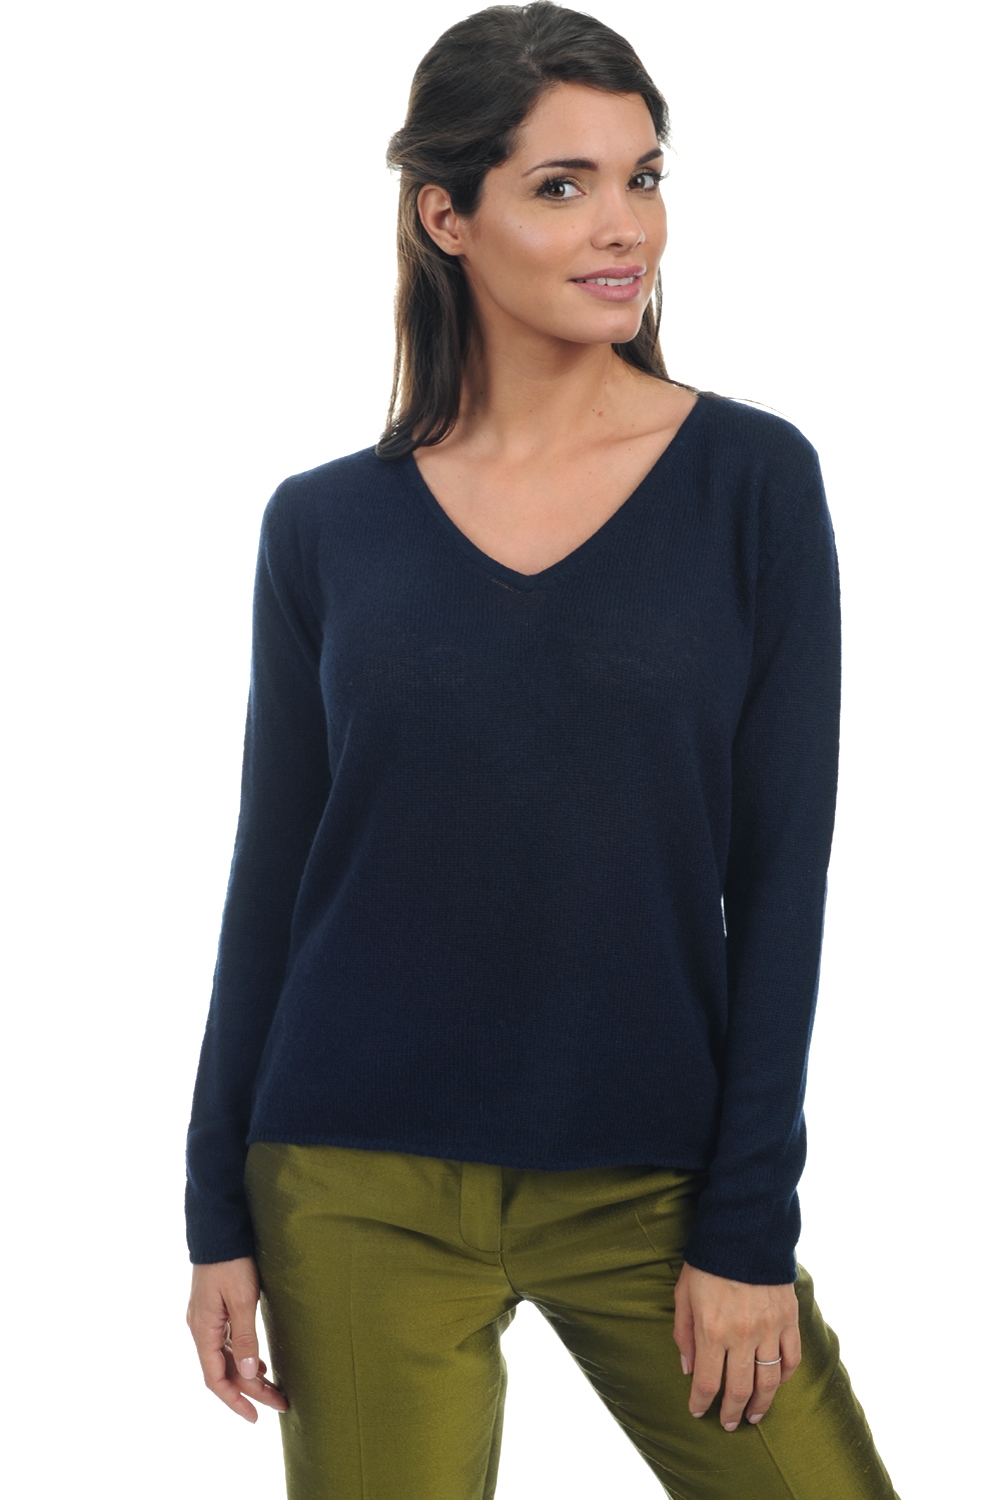 Cashmere ladies basic sweaters at low prices flavie dress blue xl